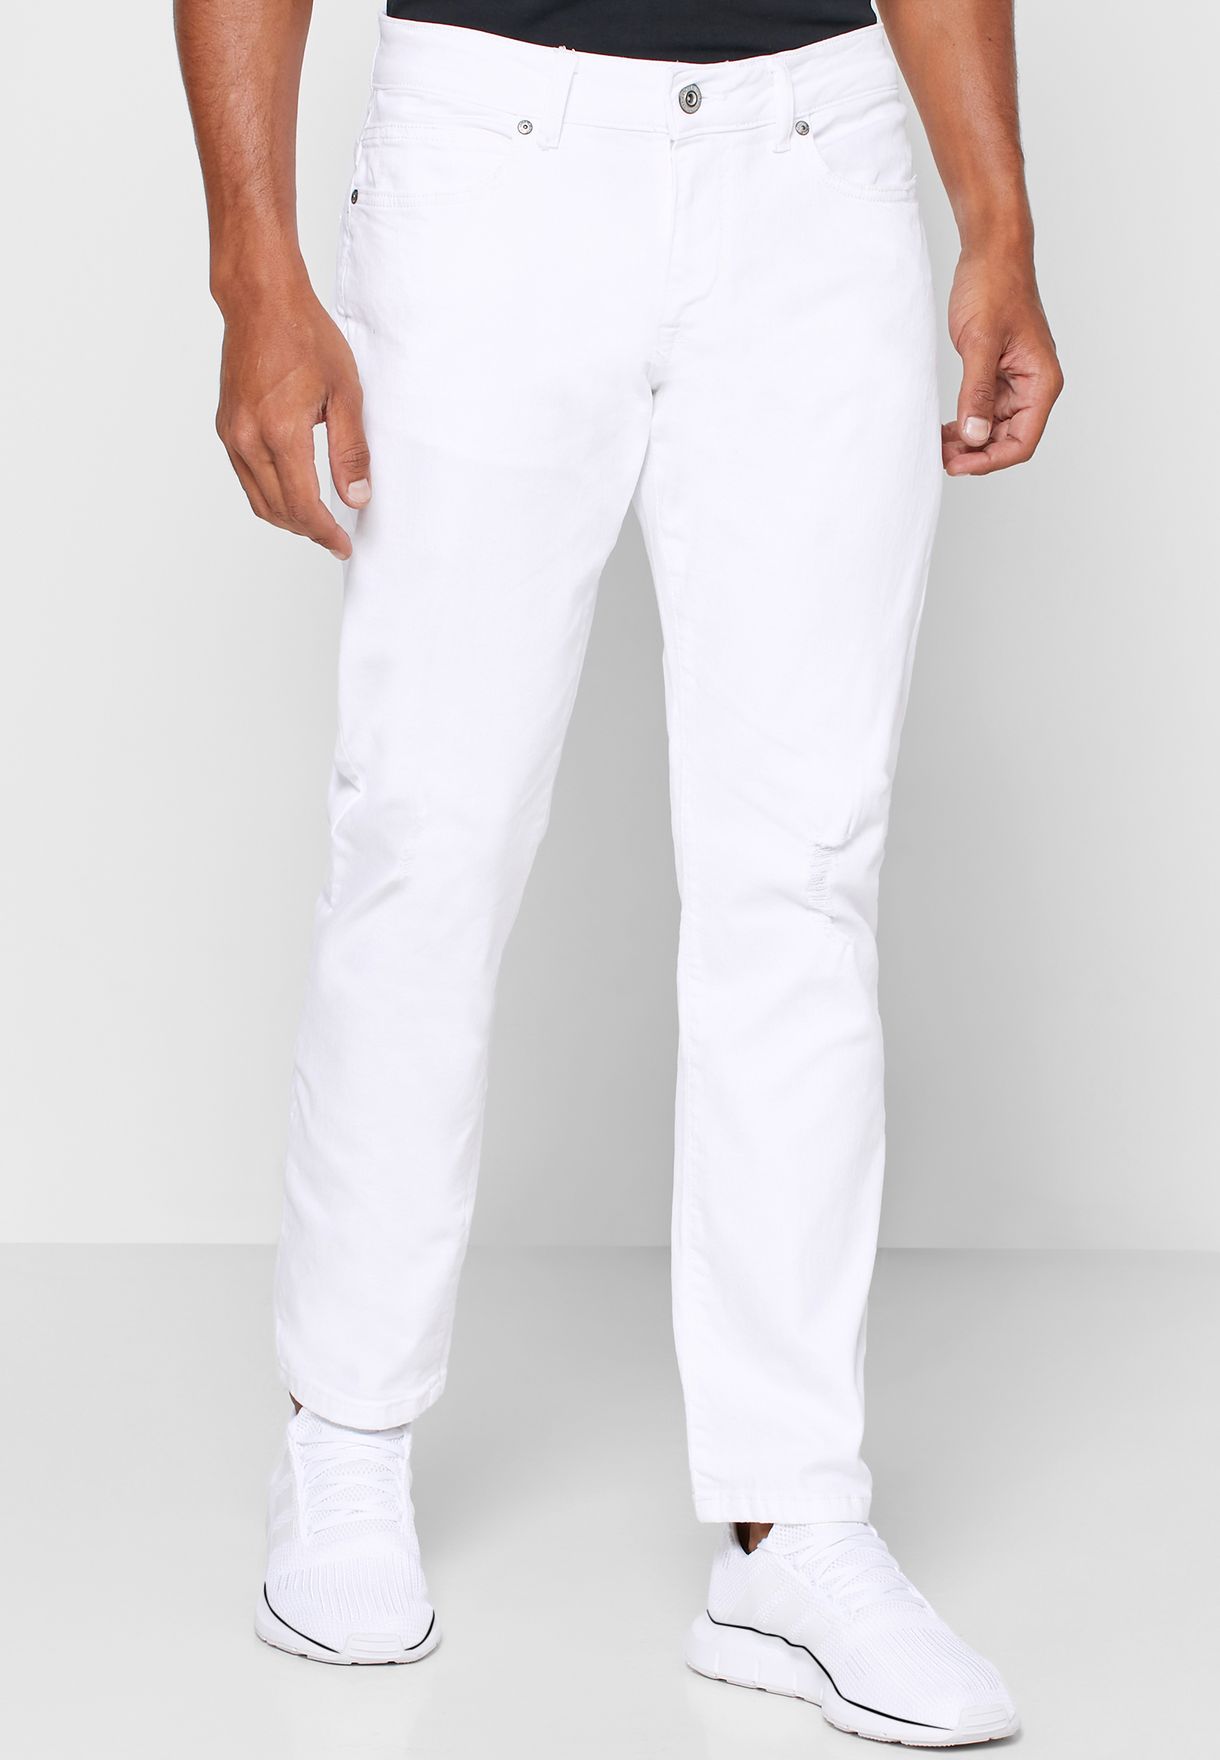 lee white jeans for sale